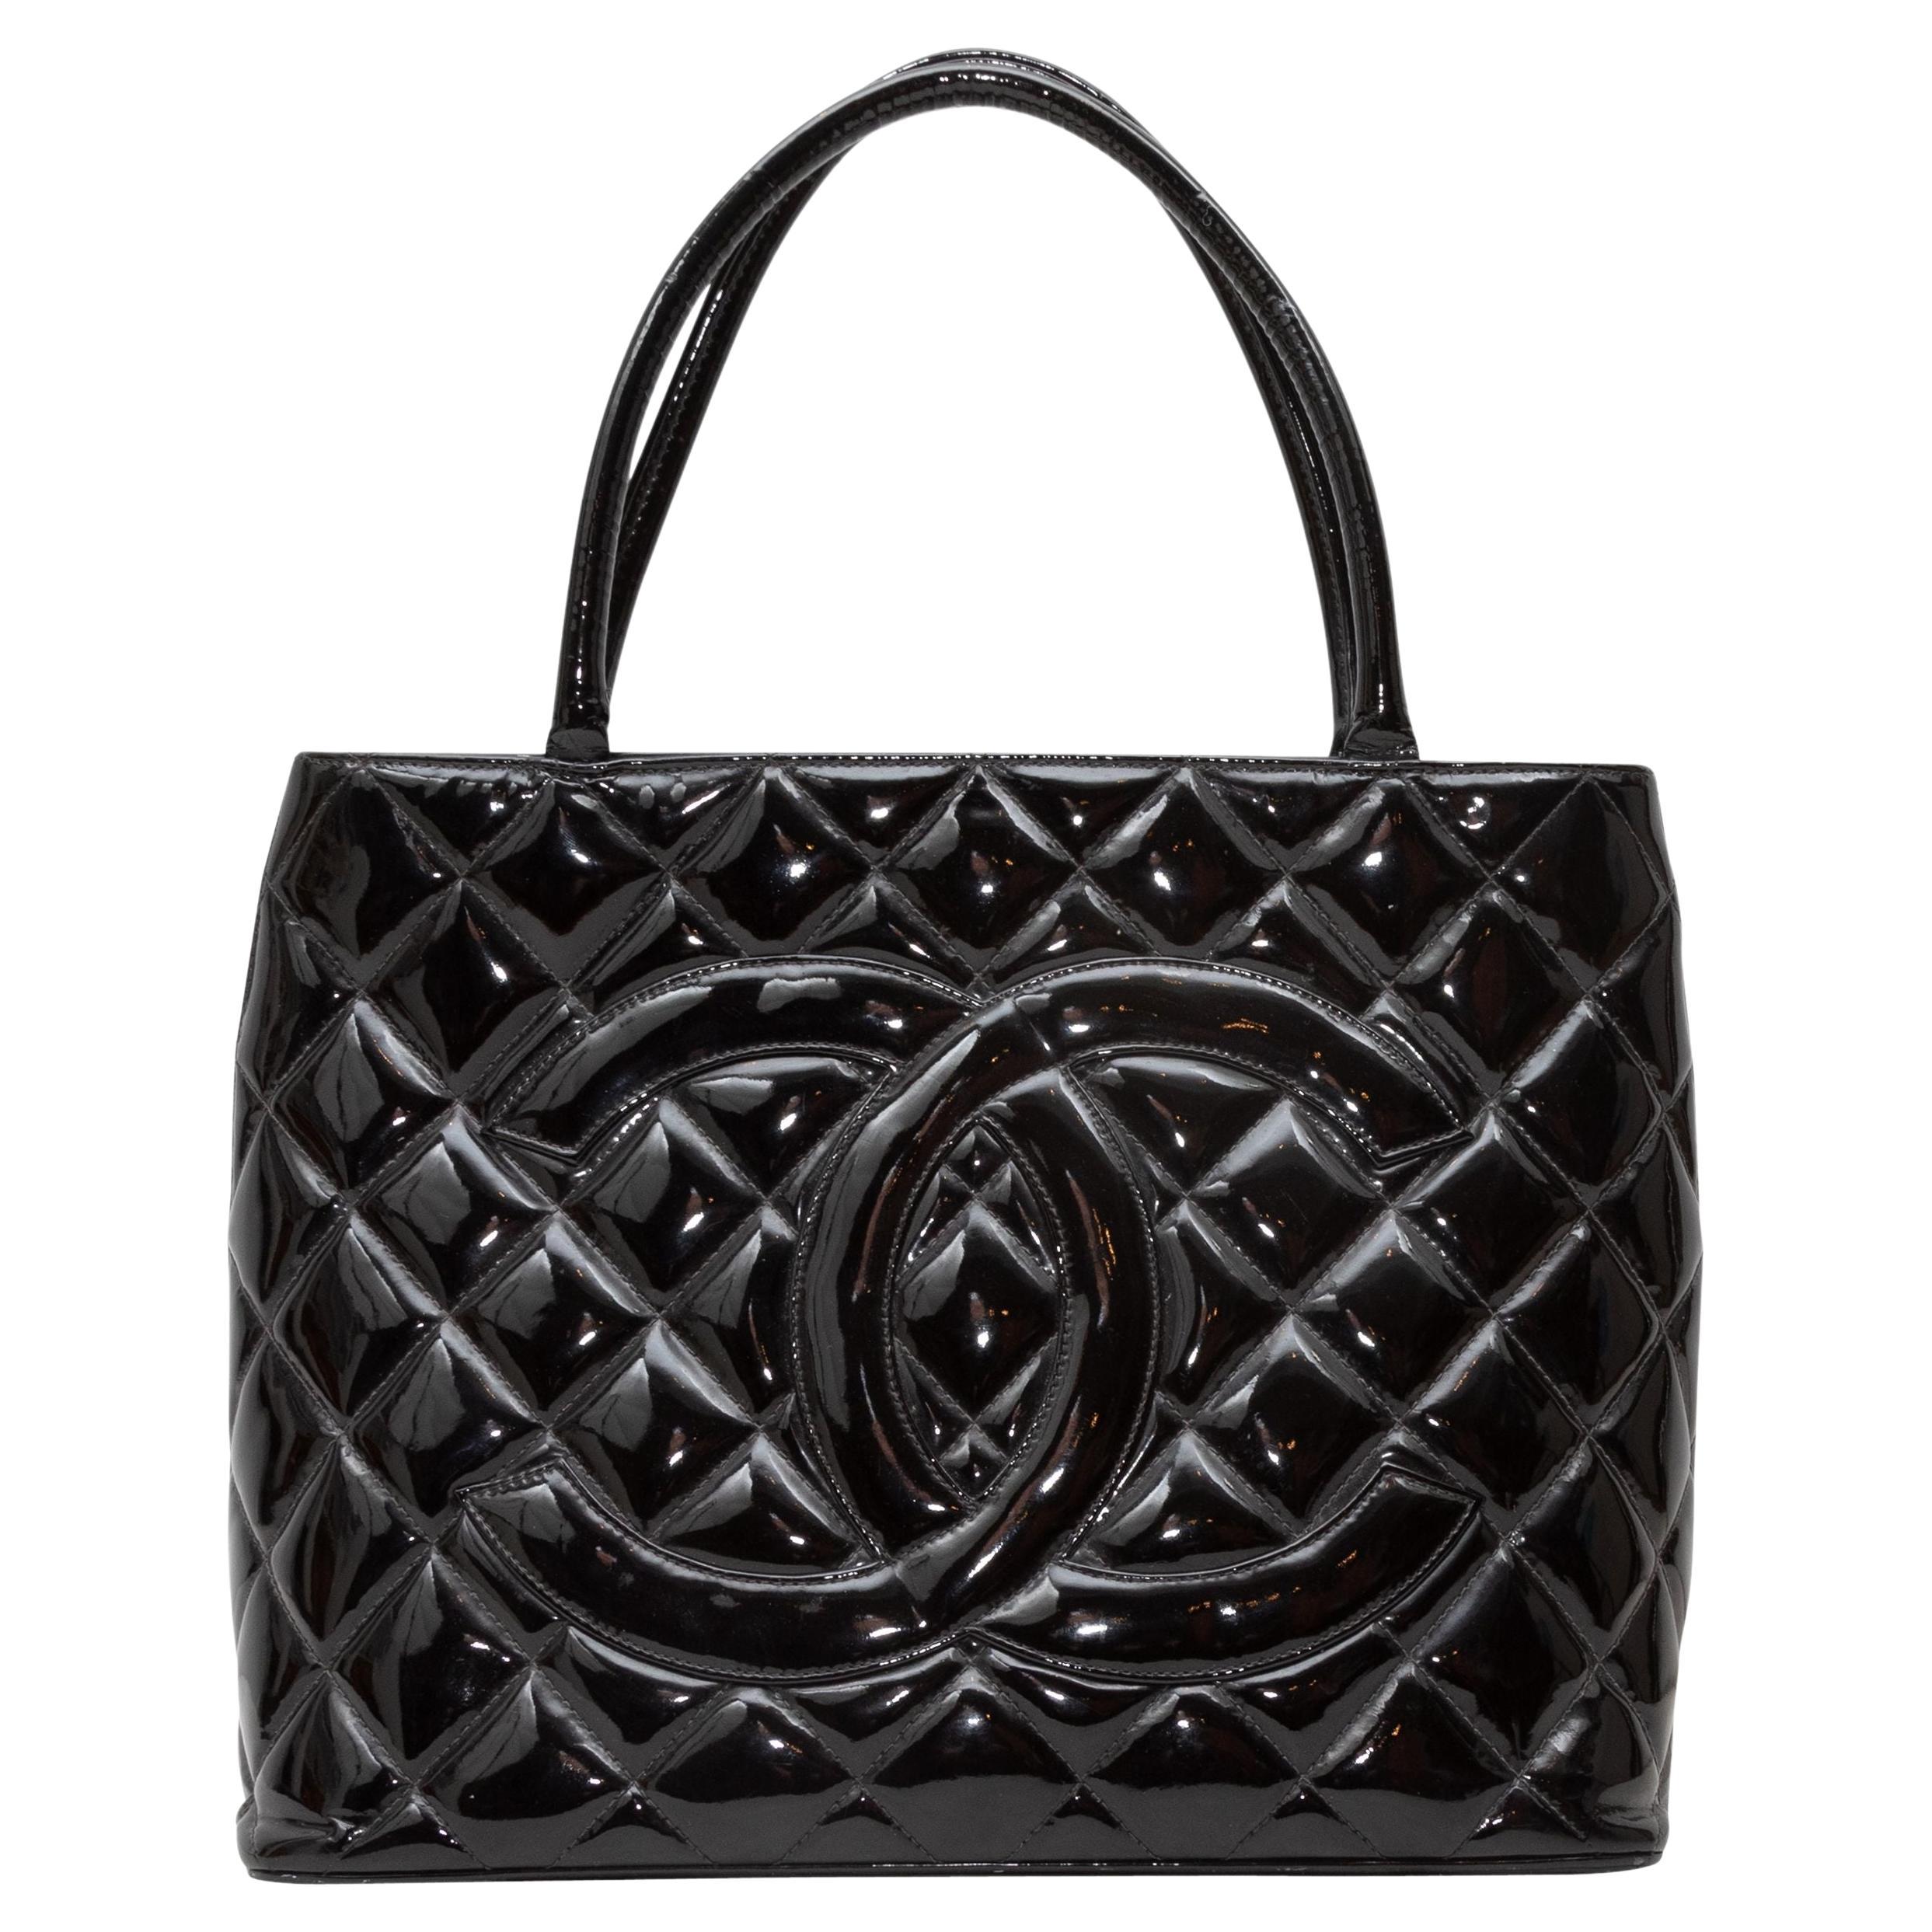 Chanel Black Quilted Patent Leather Tote Bag